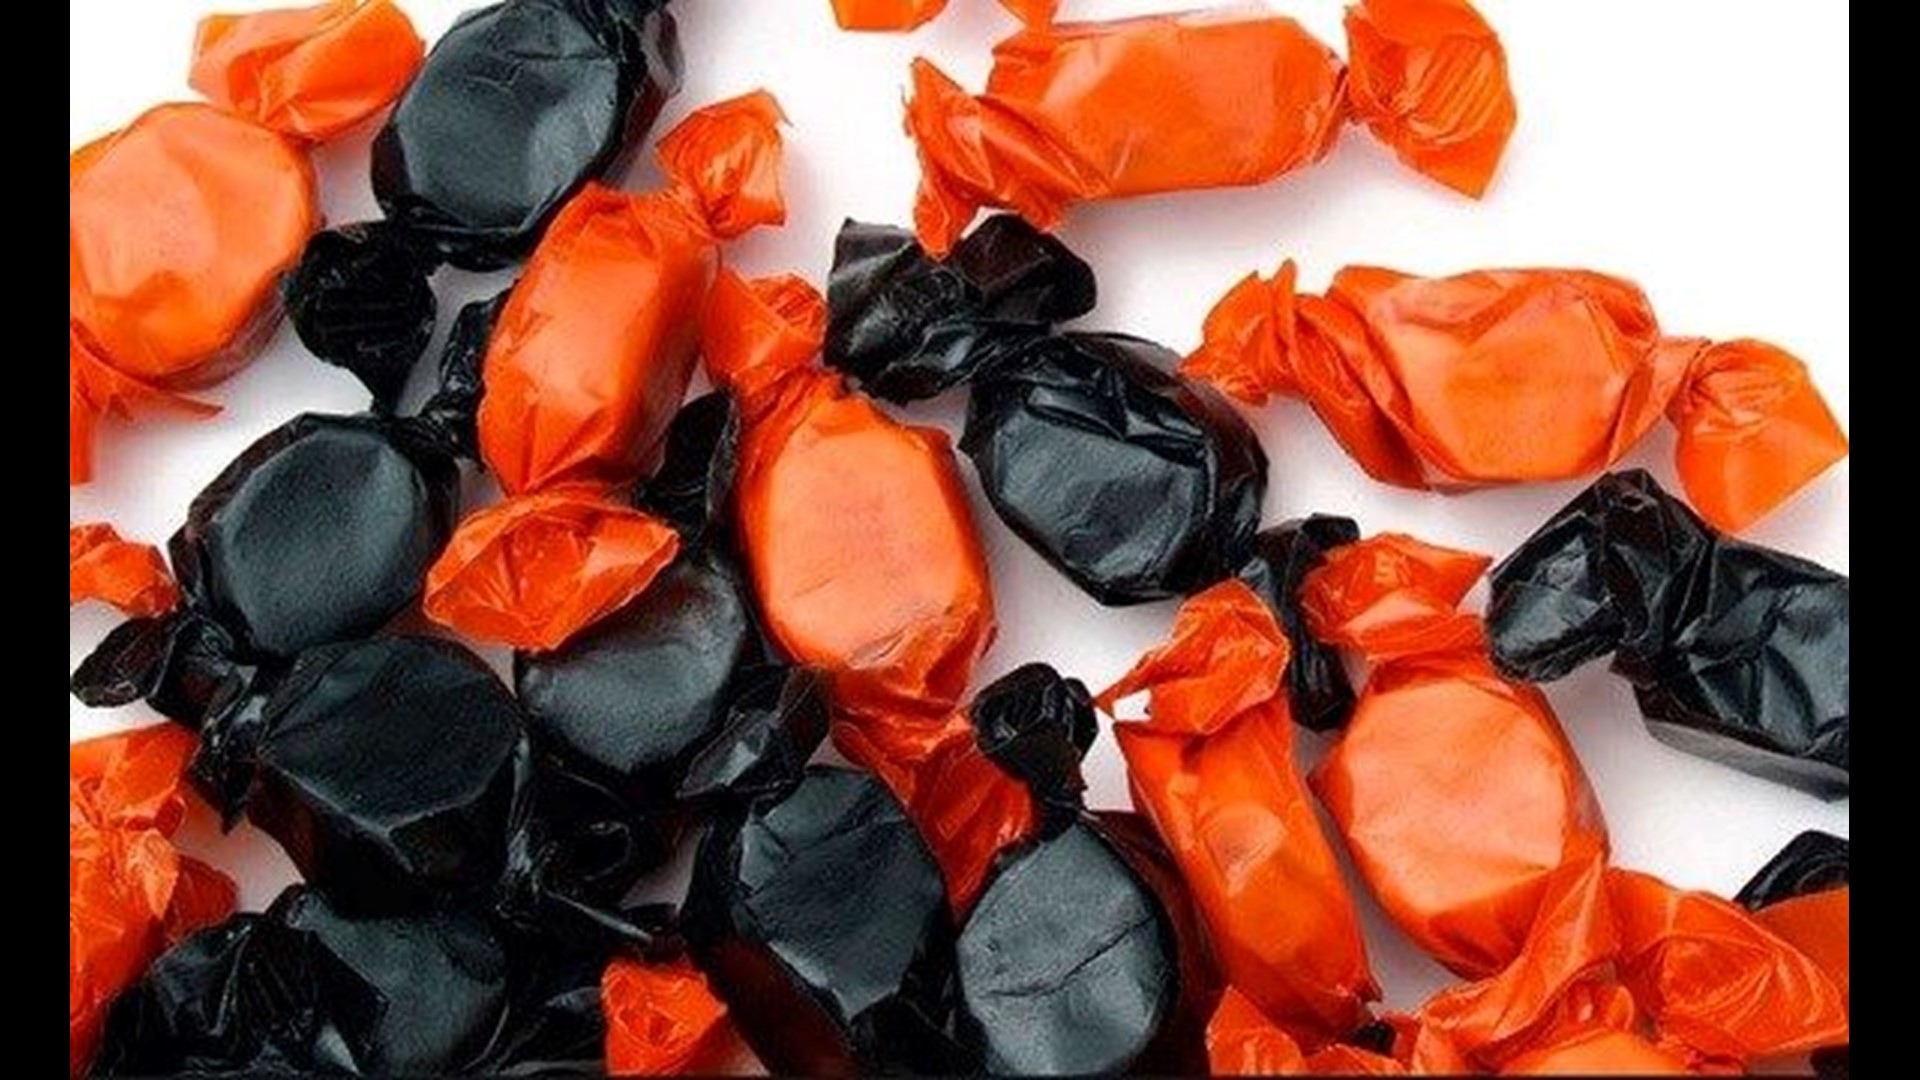 What is the worst Halloween candy to get while trick-or-treating